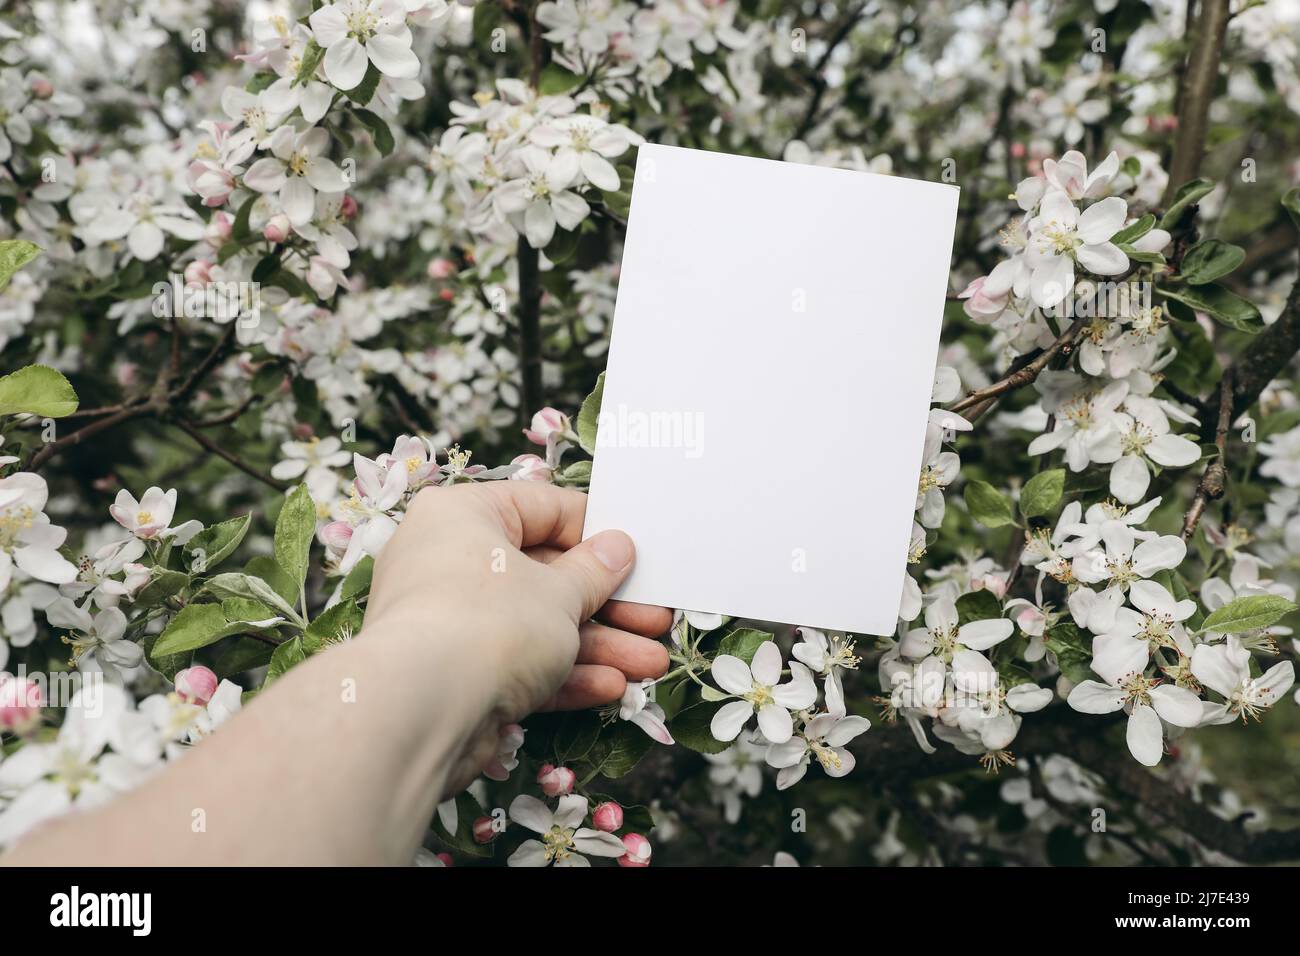 Woman's hand holding blank greeting, business card. White blooming apple trees in the garden, orchard. Spring wedding stationery mockup. Birthday Stock Photo